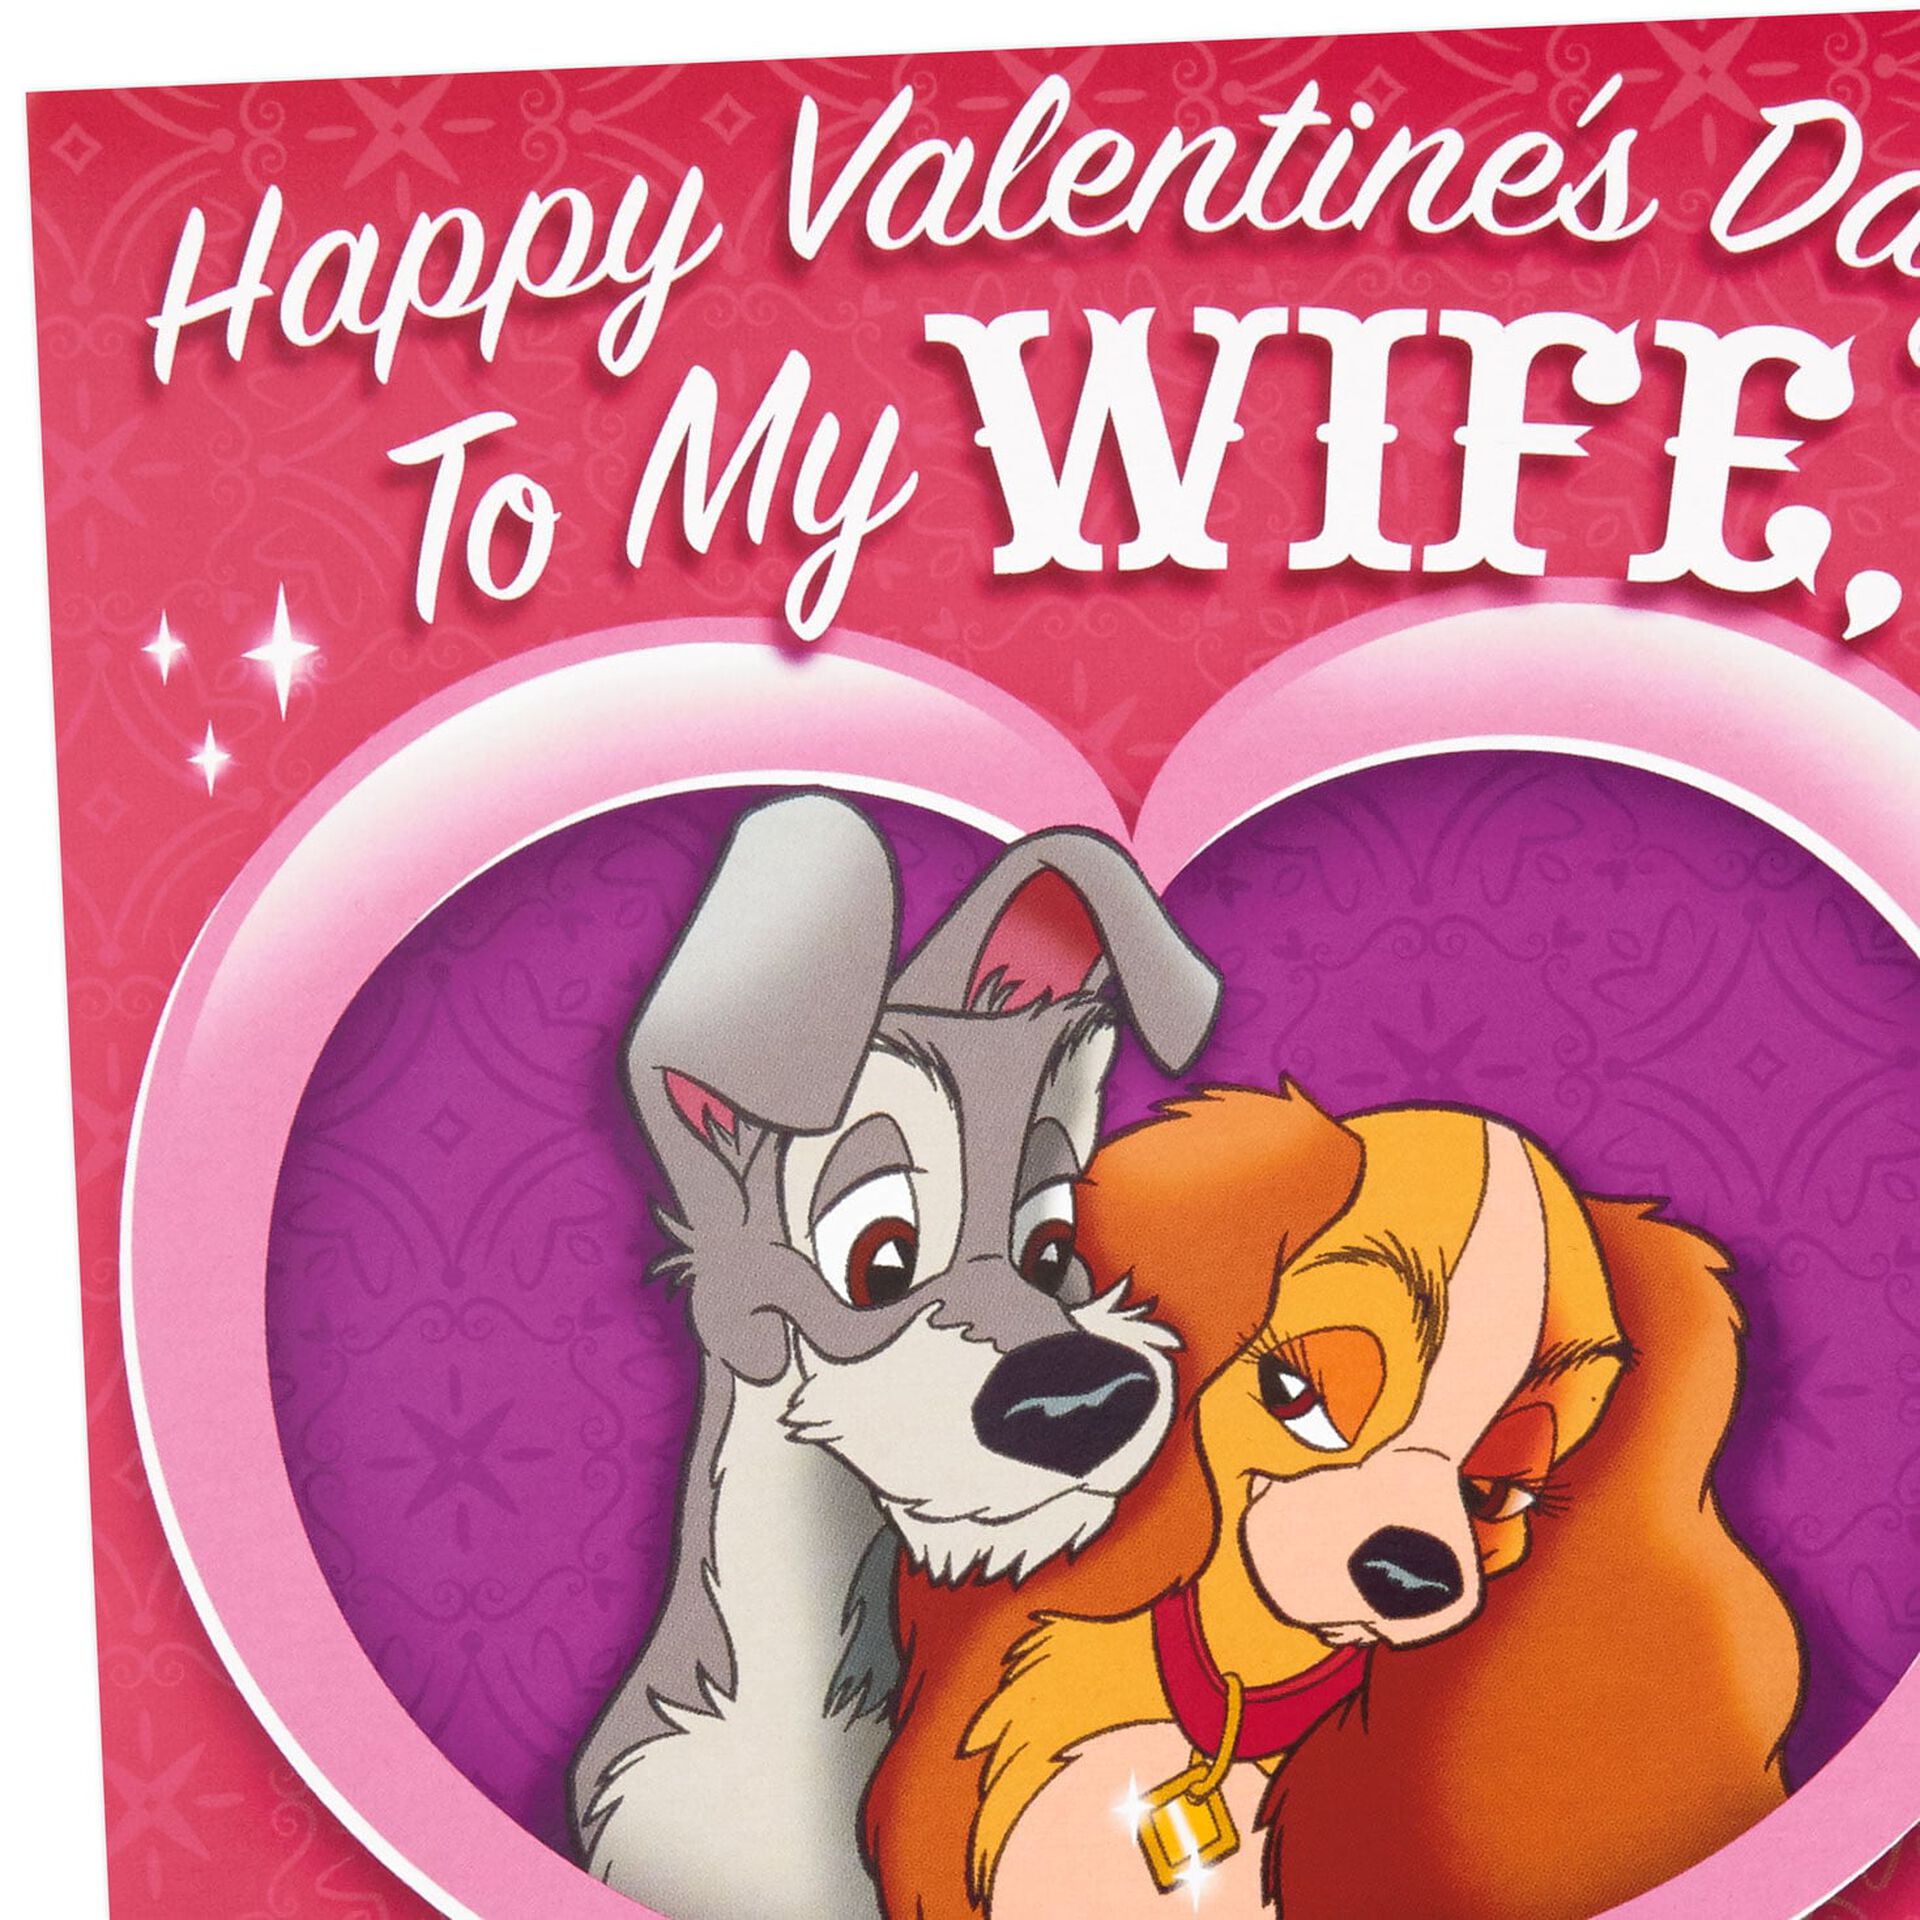 Disney Lady and the Tramp Pop-Up Valentine's Day Card for Wife